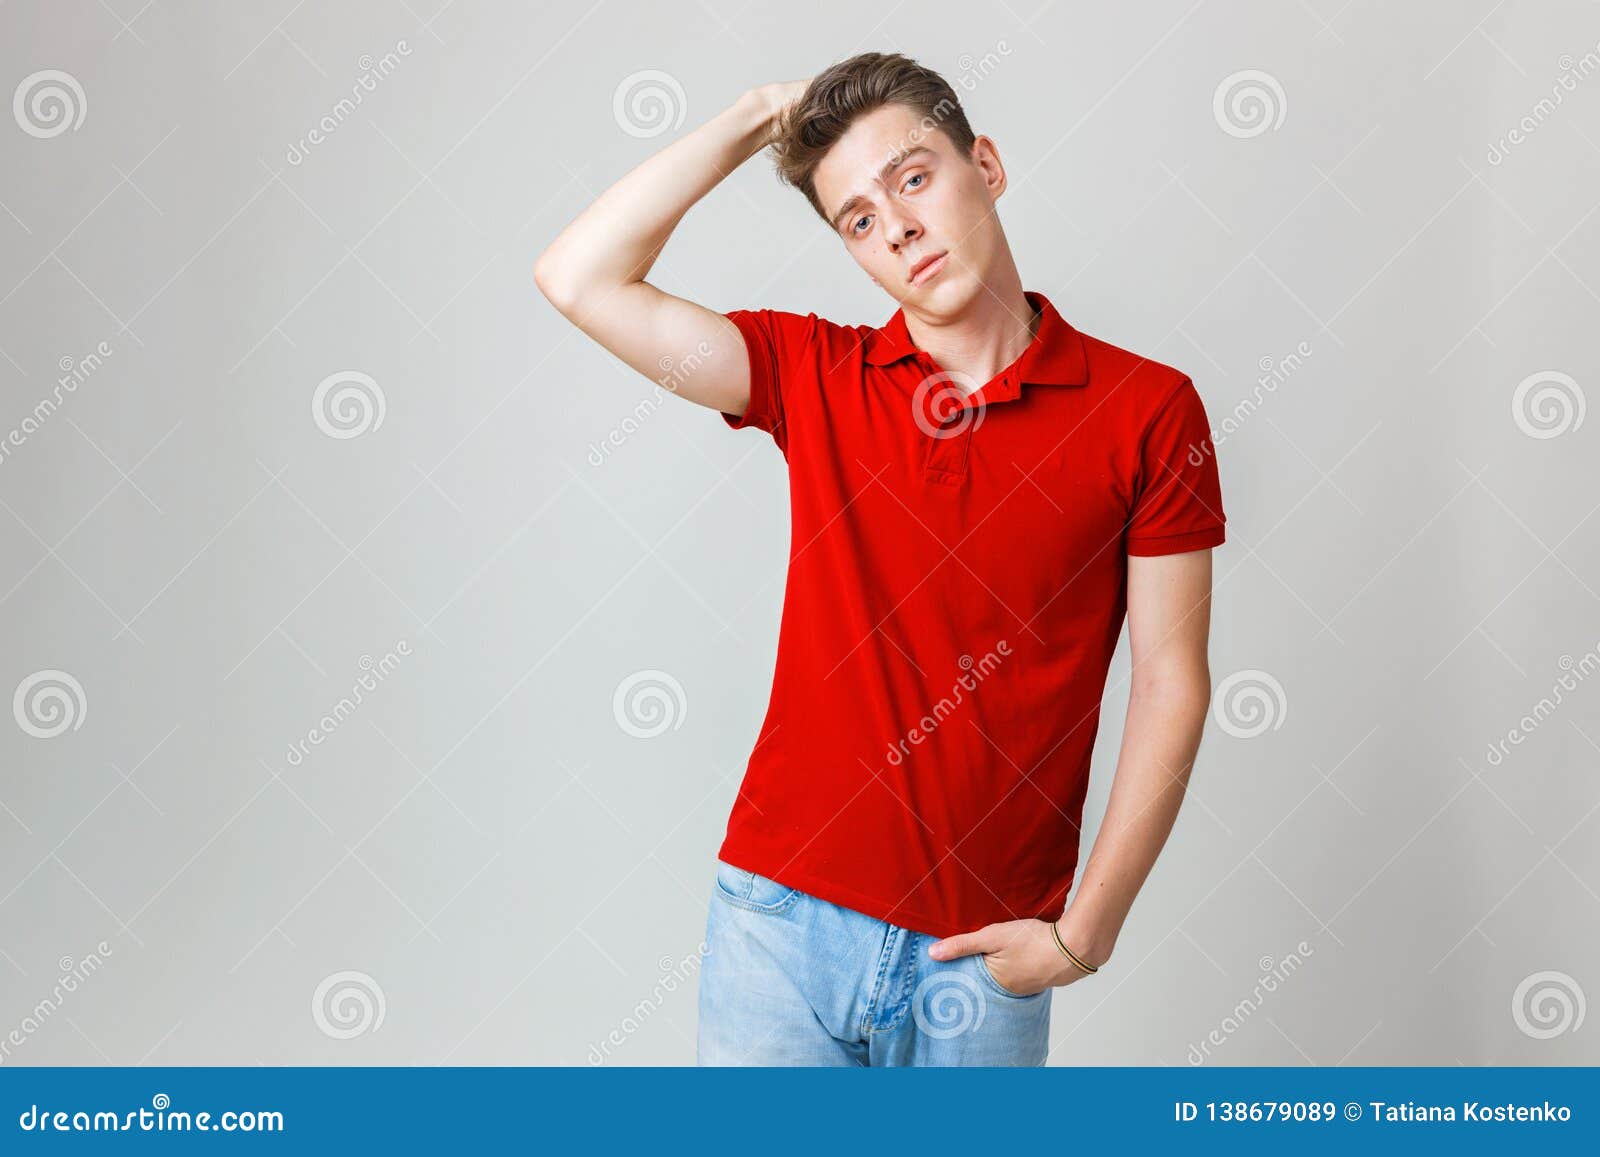 Photo of Handsome Guy Wearing Red Shirt and Blue Smiling Standing Over White with Boring Facial Stock Image Image of adult, portrait: 138679089